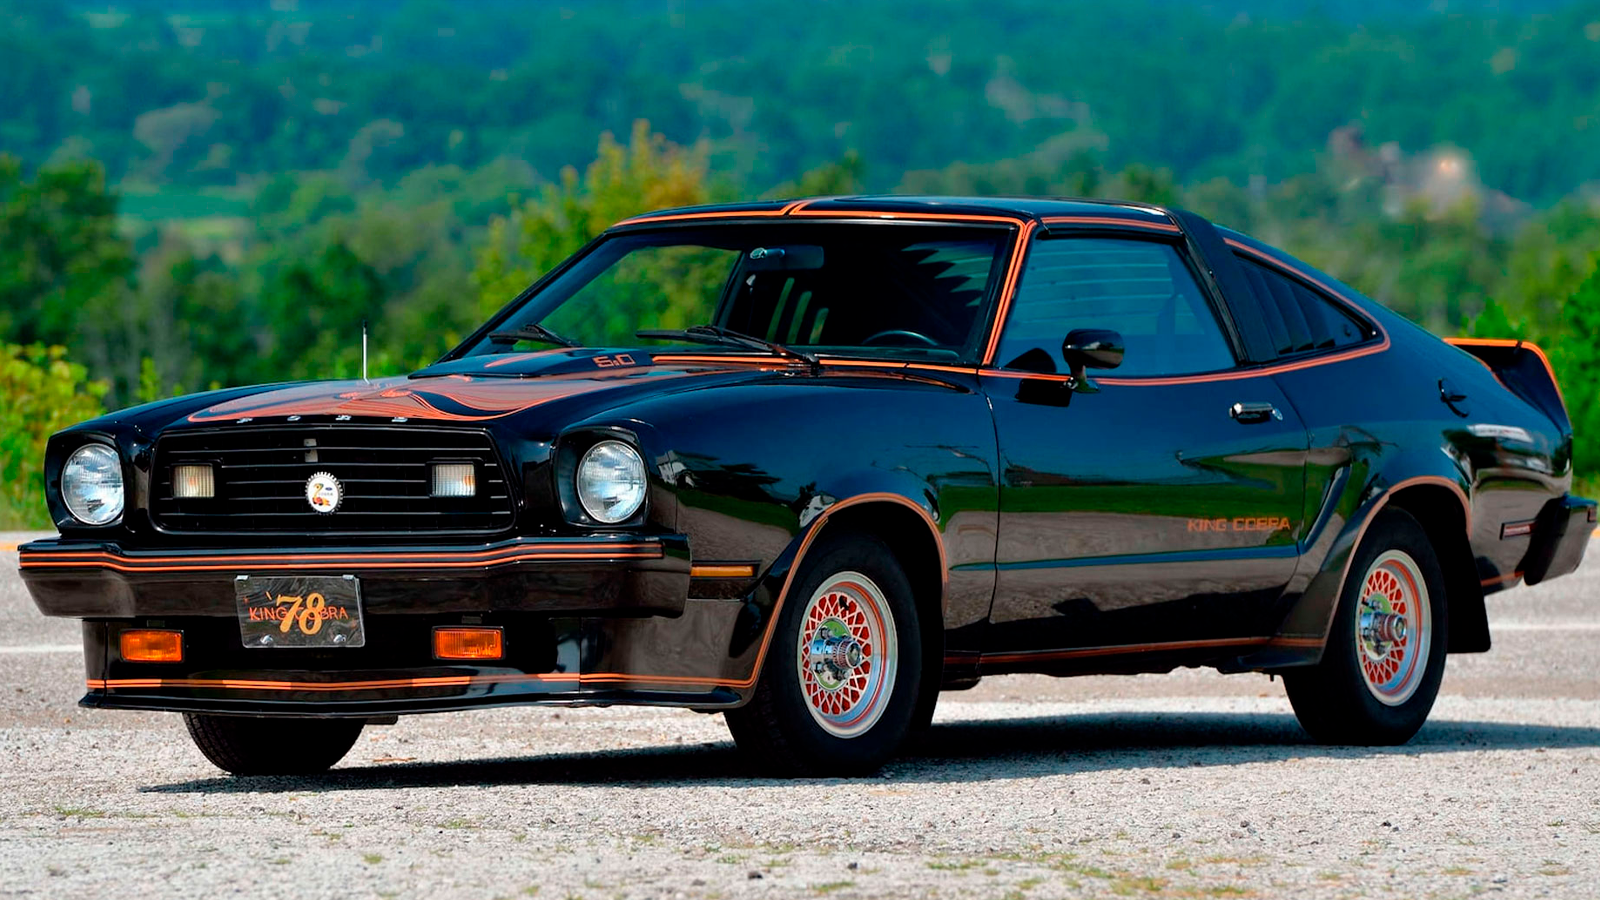 6 All Time Slowest Mustangs From 0 to 60 MPH